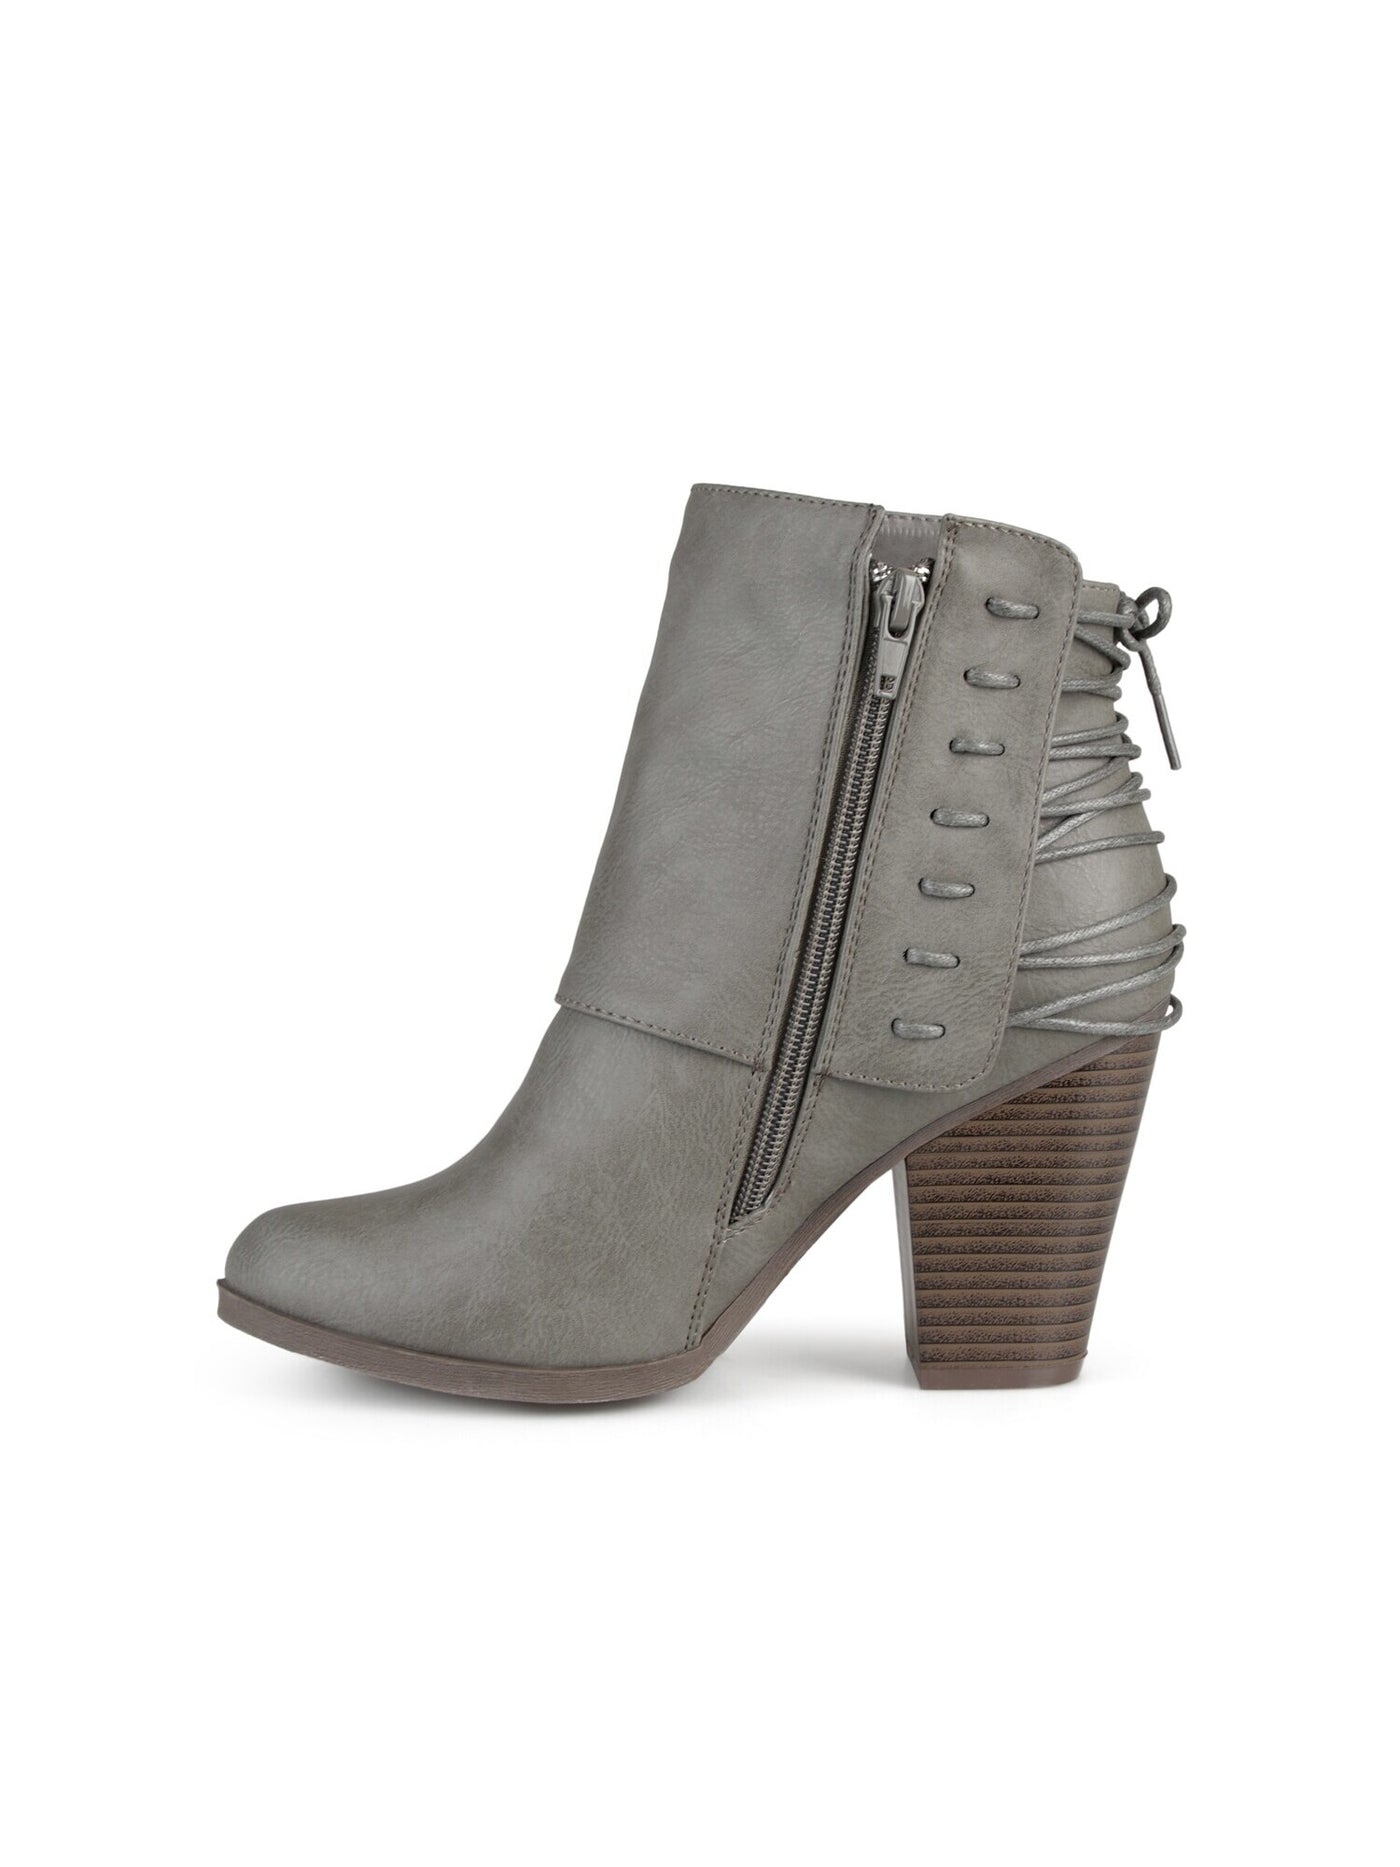 JOURNEE COLLECTION Womens Gray Corset Lacing At Back Cuff Detai Cushioned Ayla Round Toe Block Heel Zip-Up Dress Booties 10